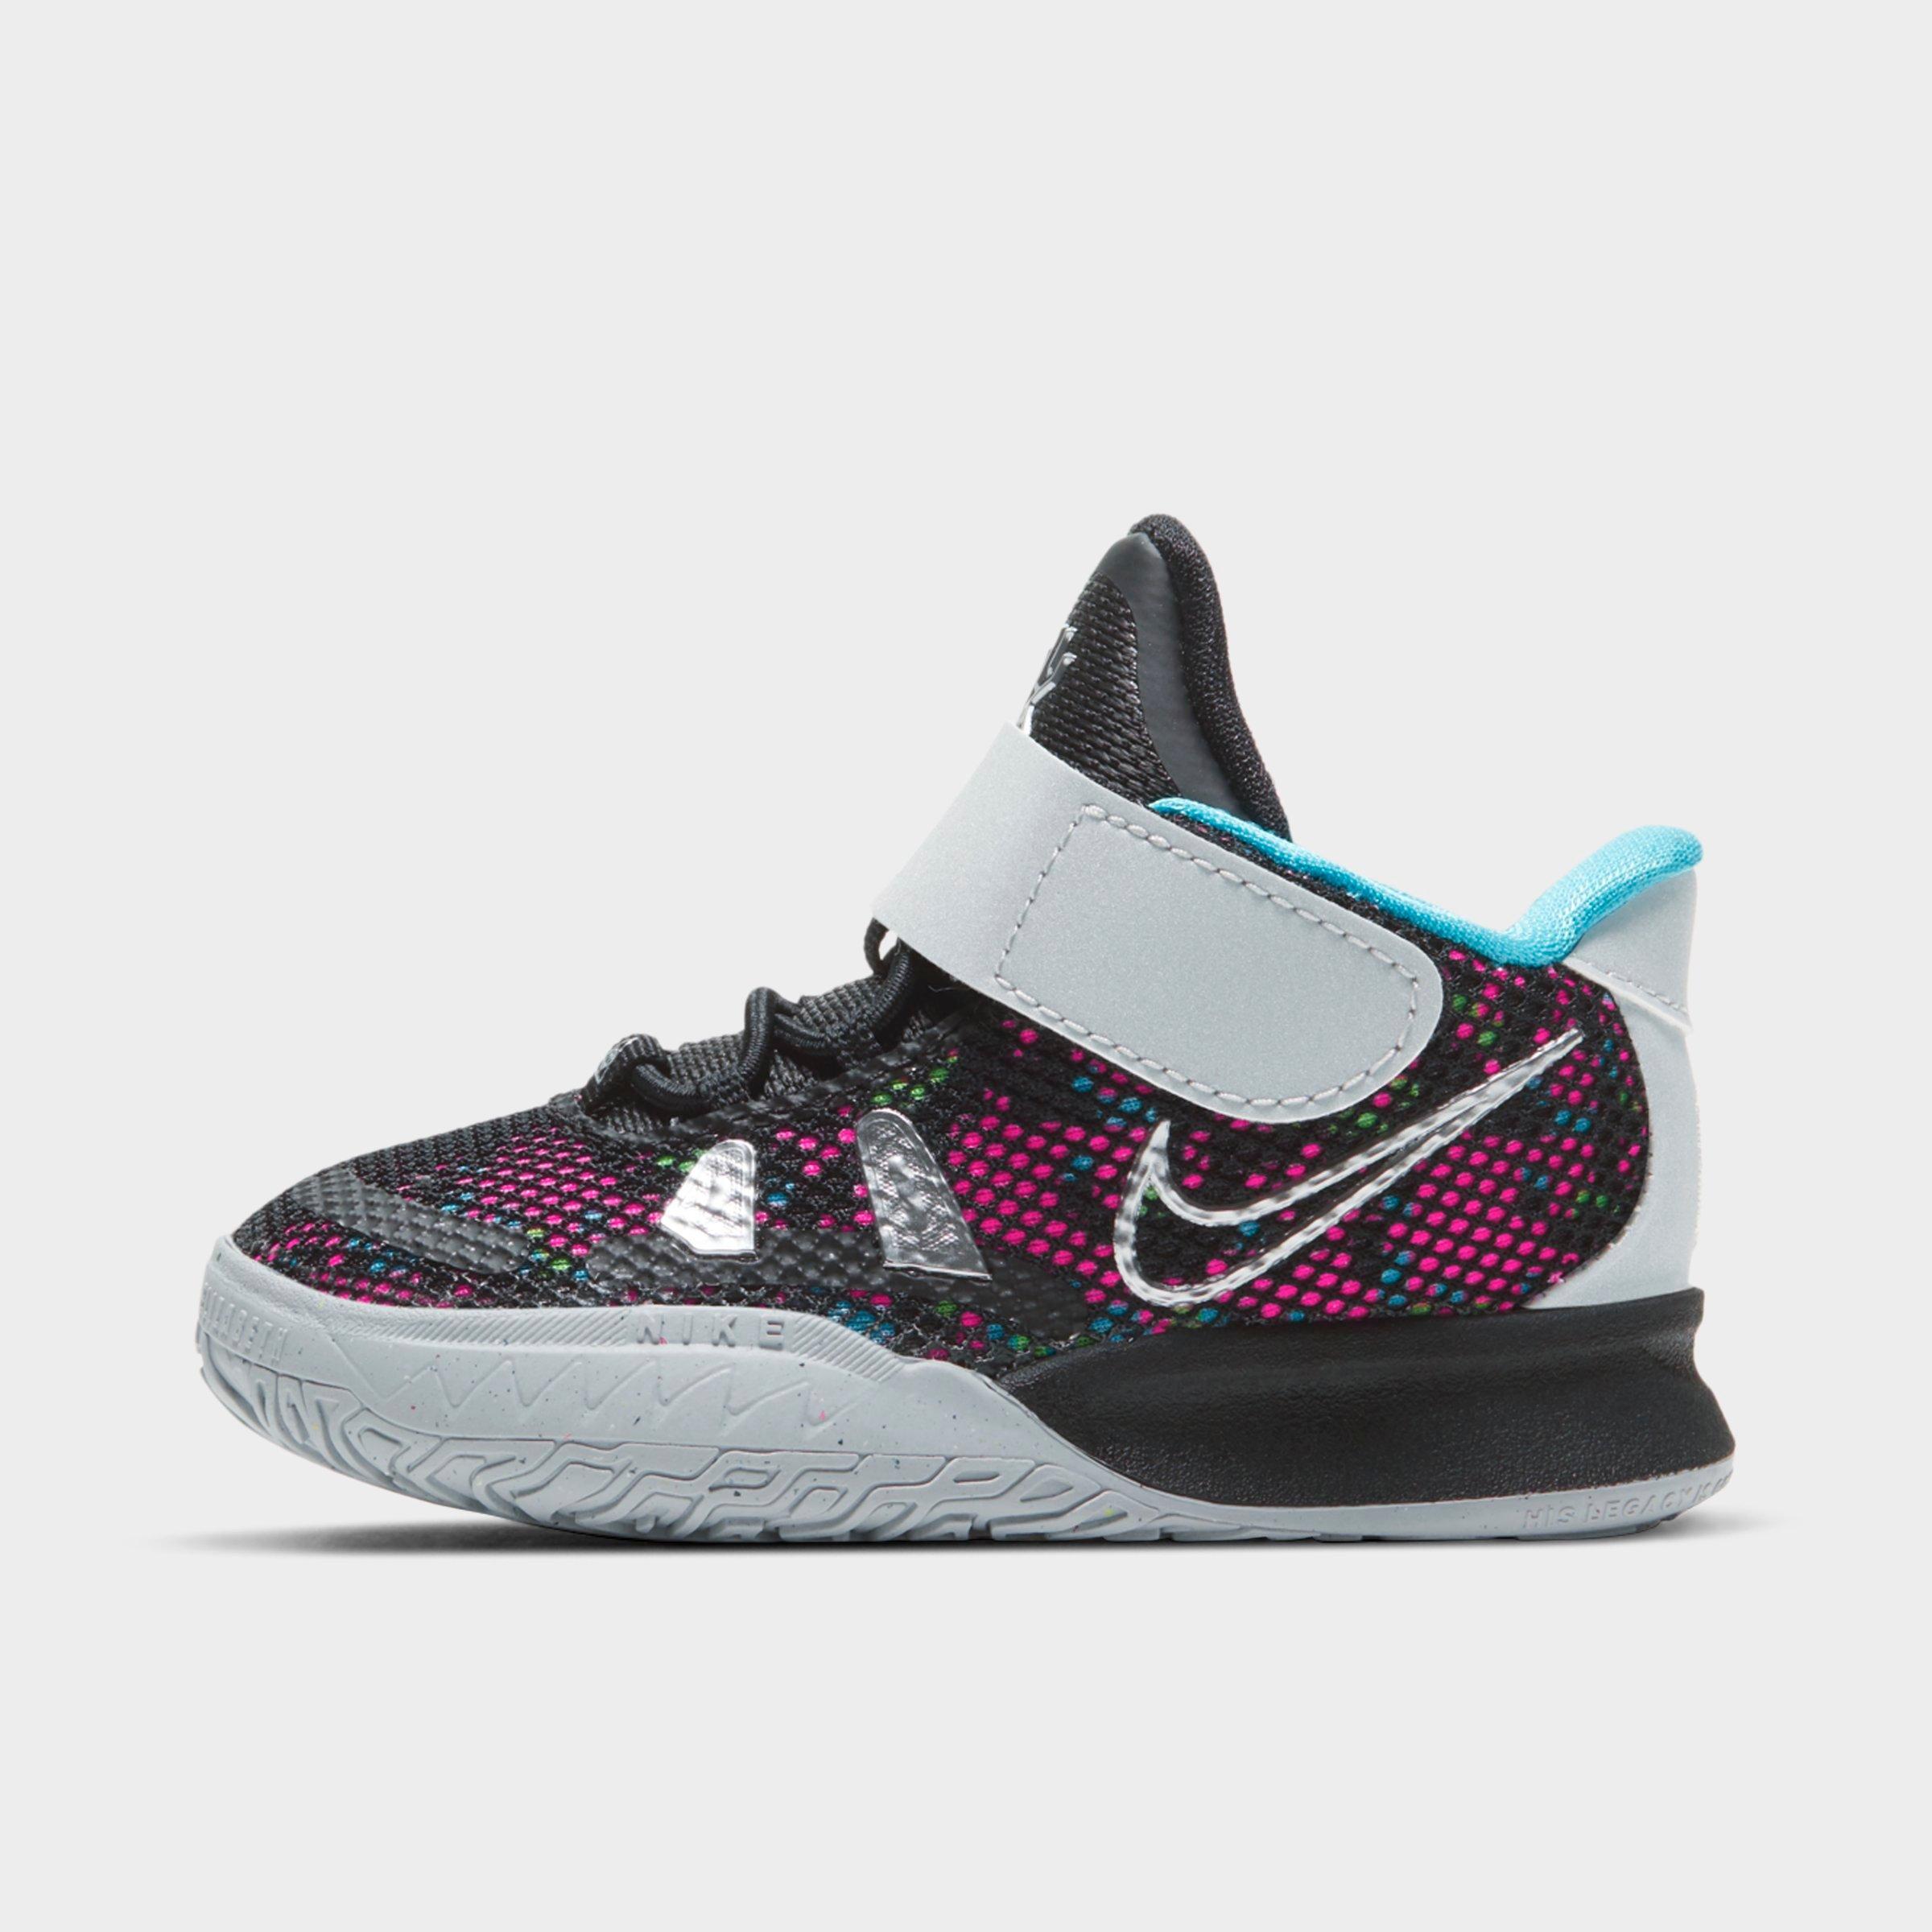 kyrie irving shoes finish line